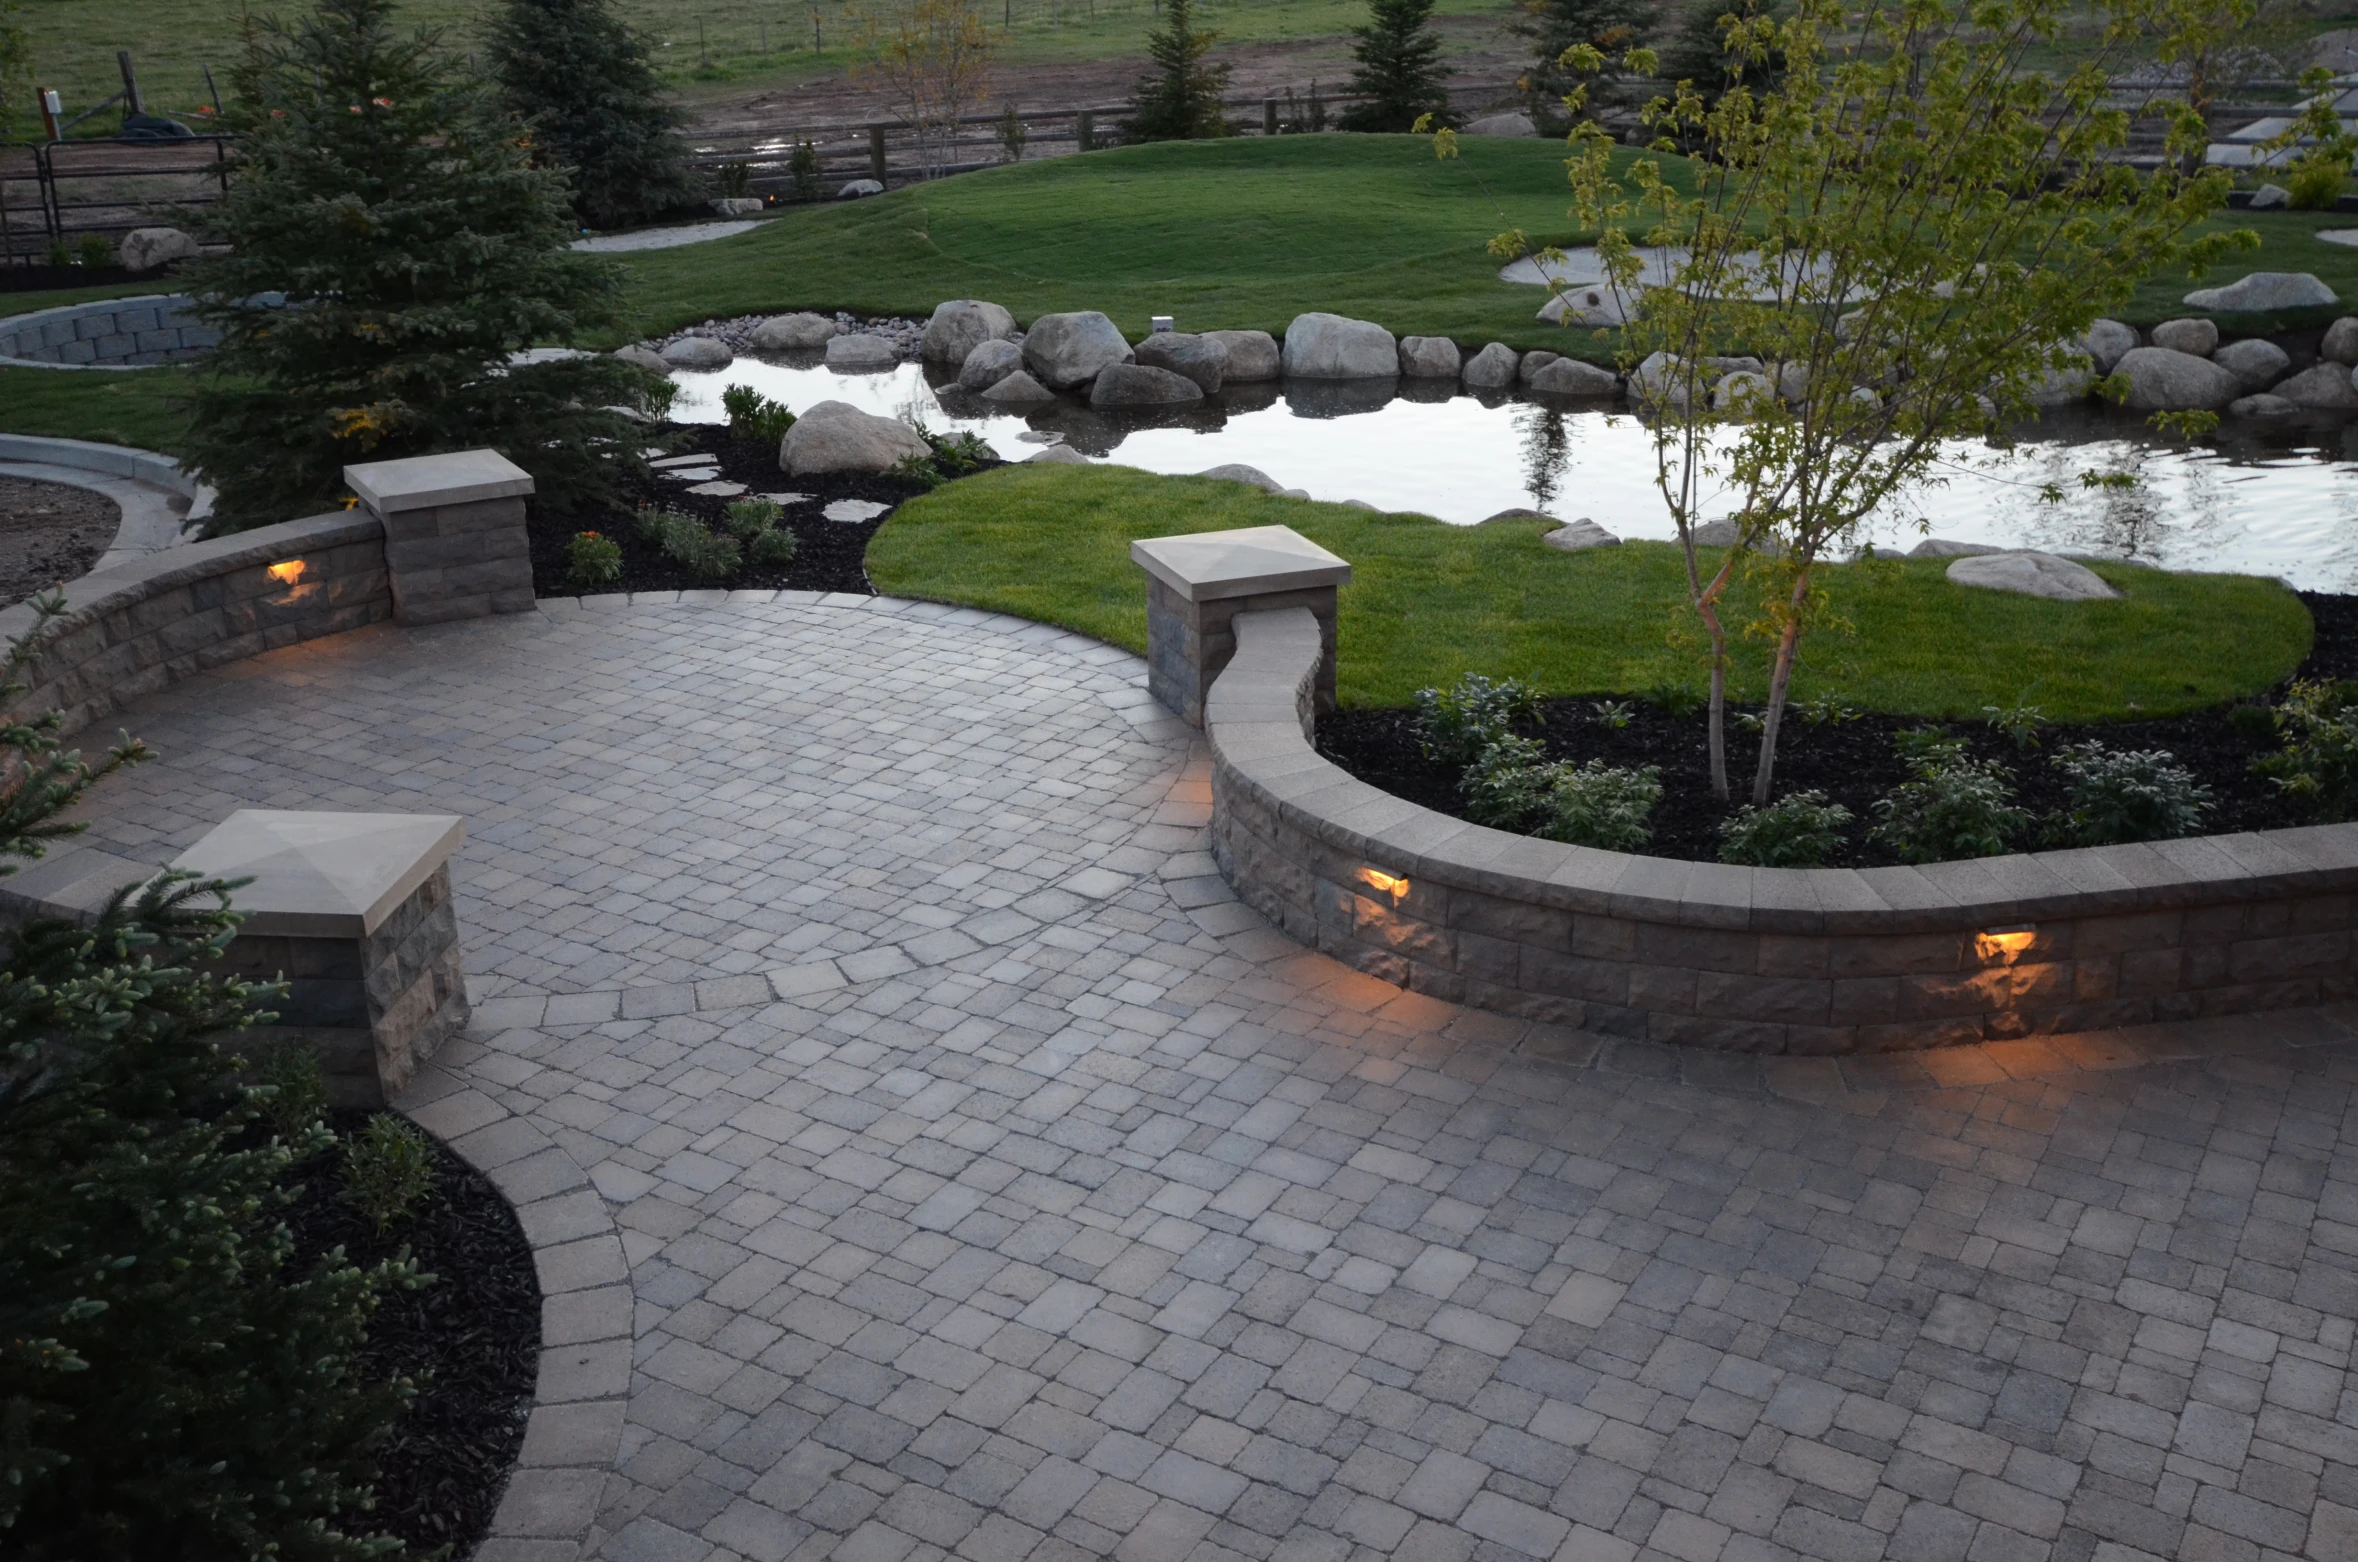 an outside view of a stone paved patio with lighting